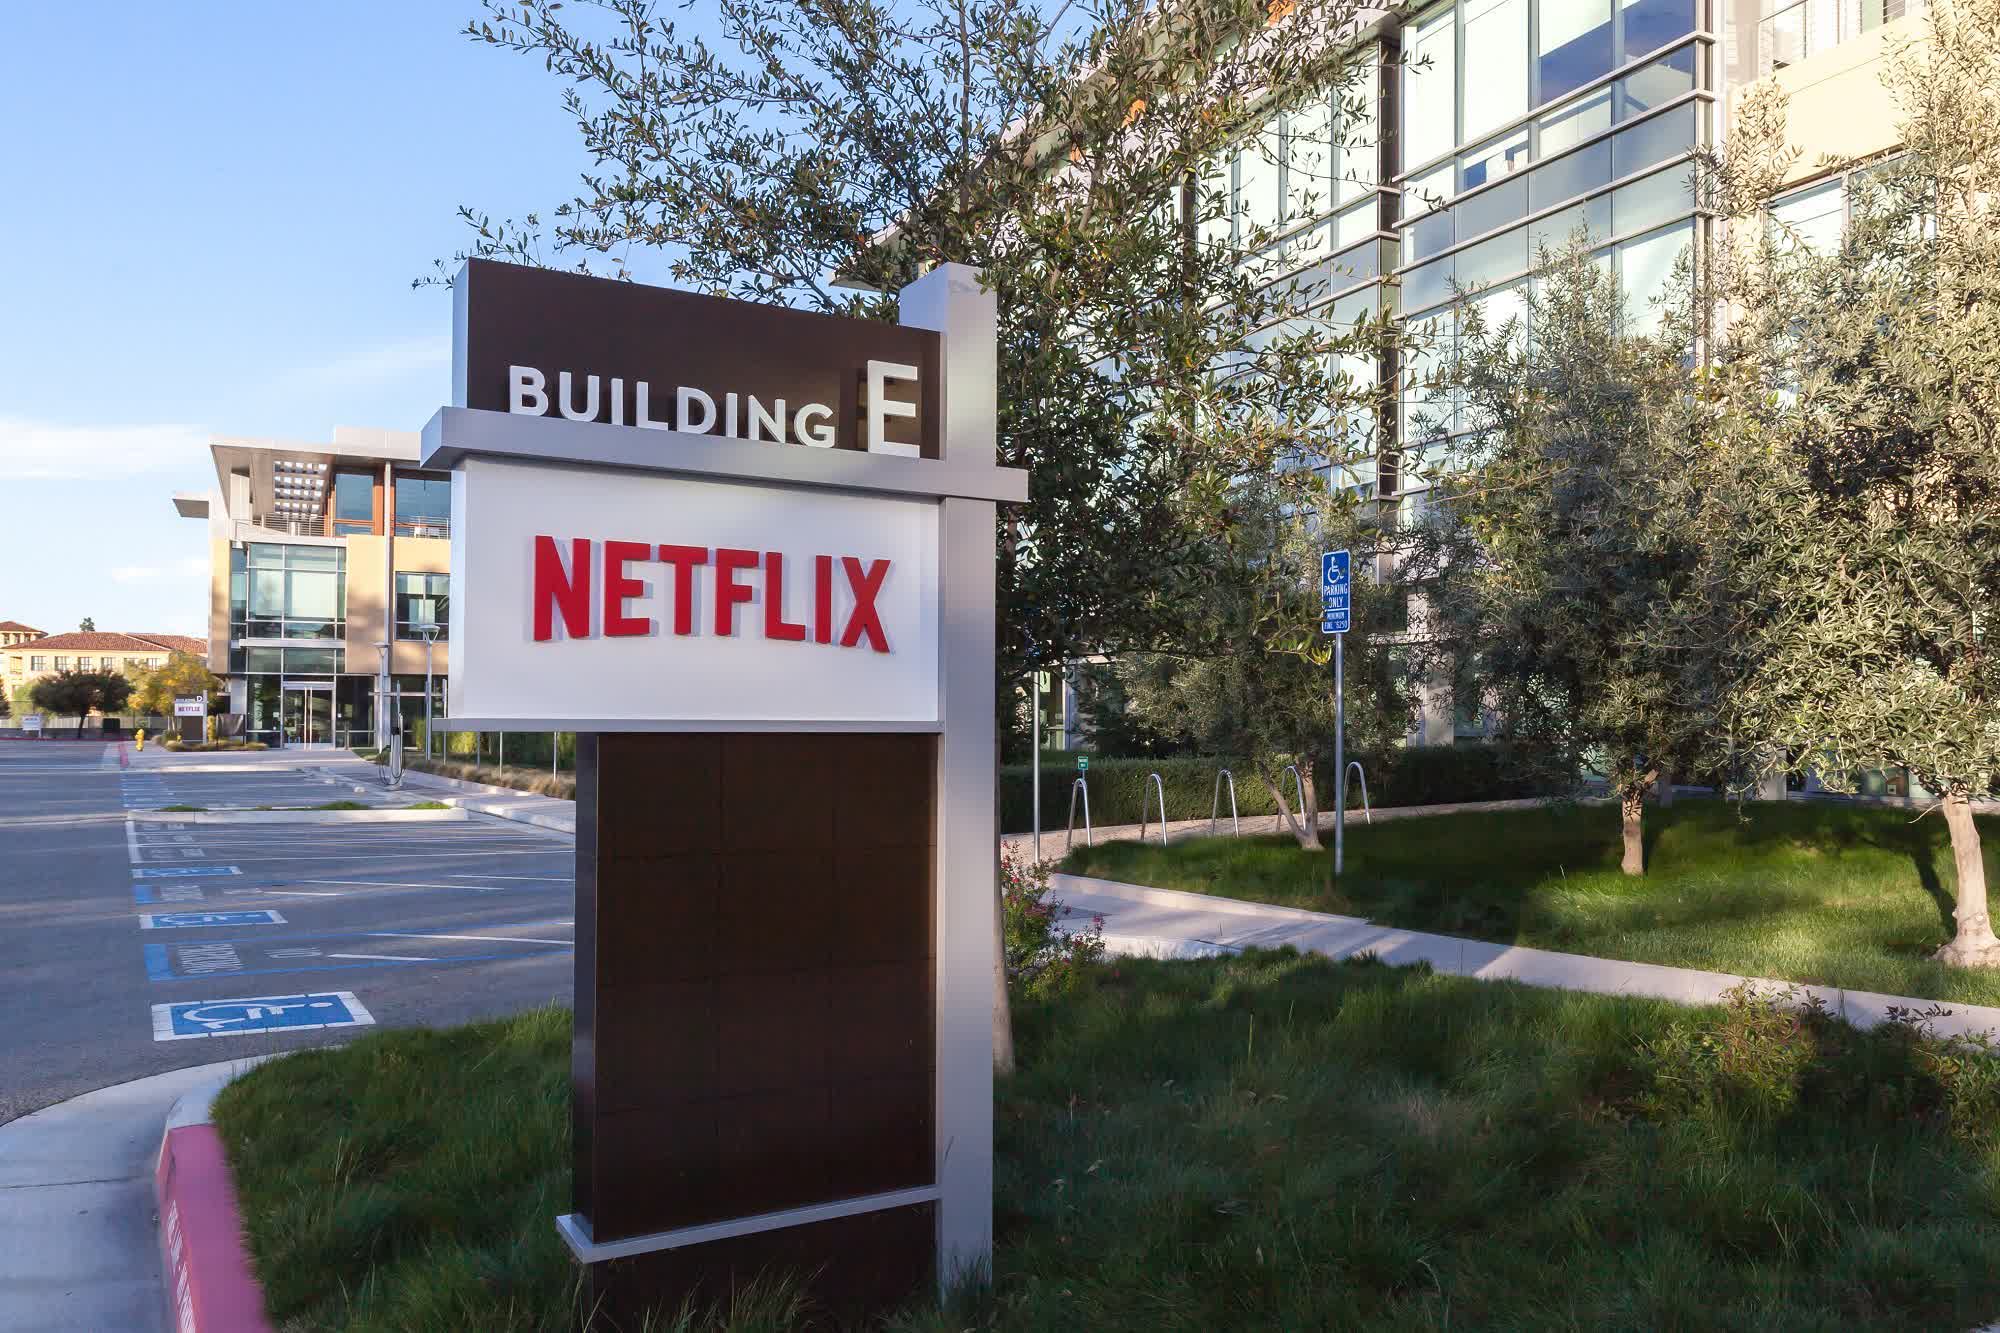 Netflix boss says staff can return to office when the majority are vaccinated